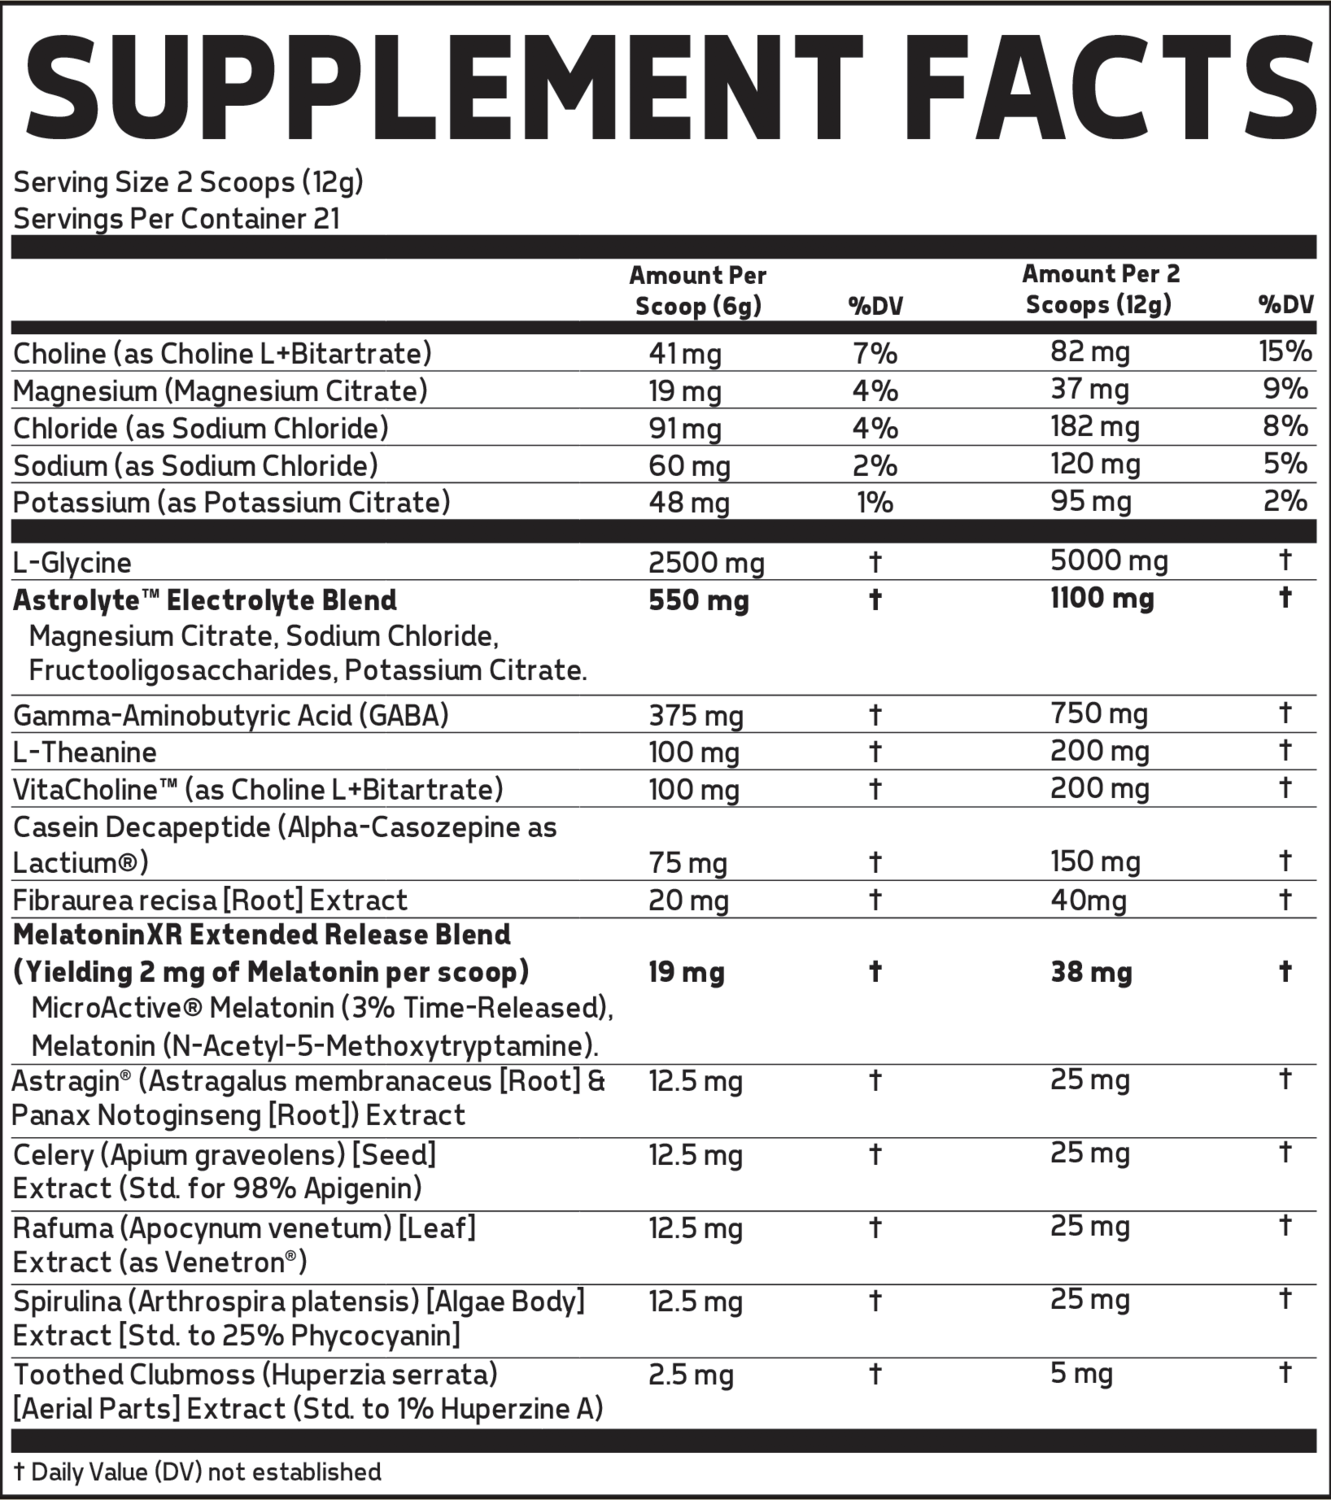 Supplement facts listing ingredients such as Choline, Magnesium, Sodium, Potassium, L-Glycine among others, indicating servings per container and their daily values.